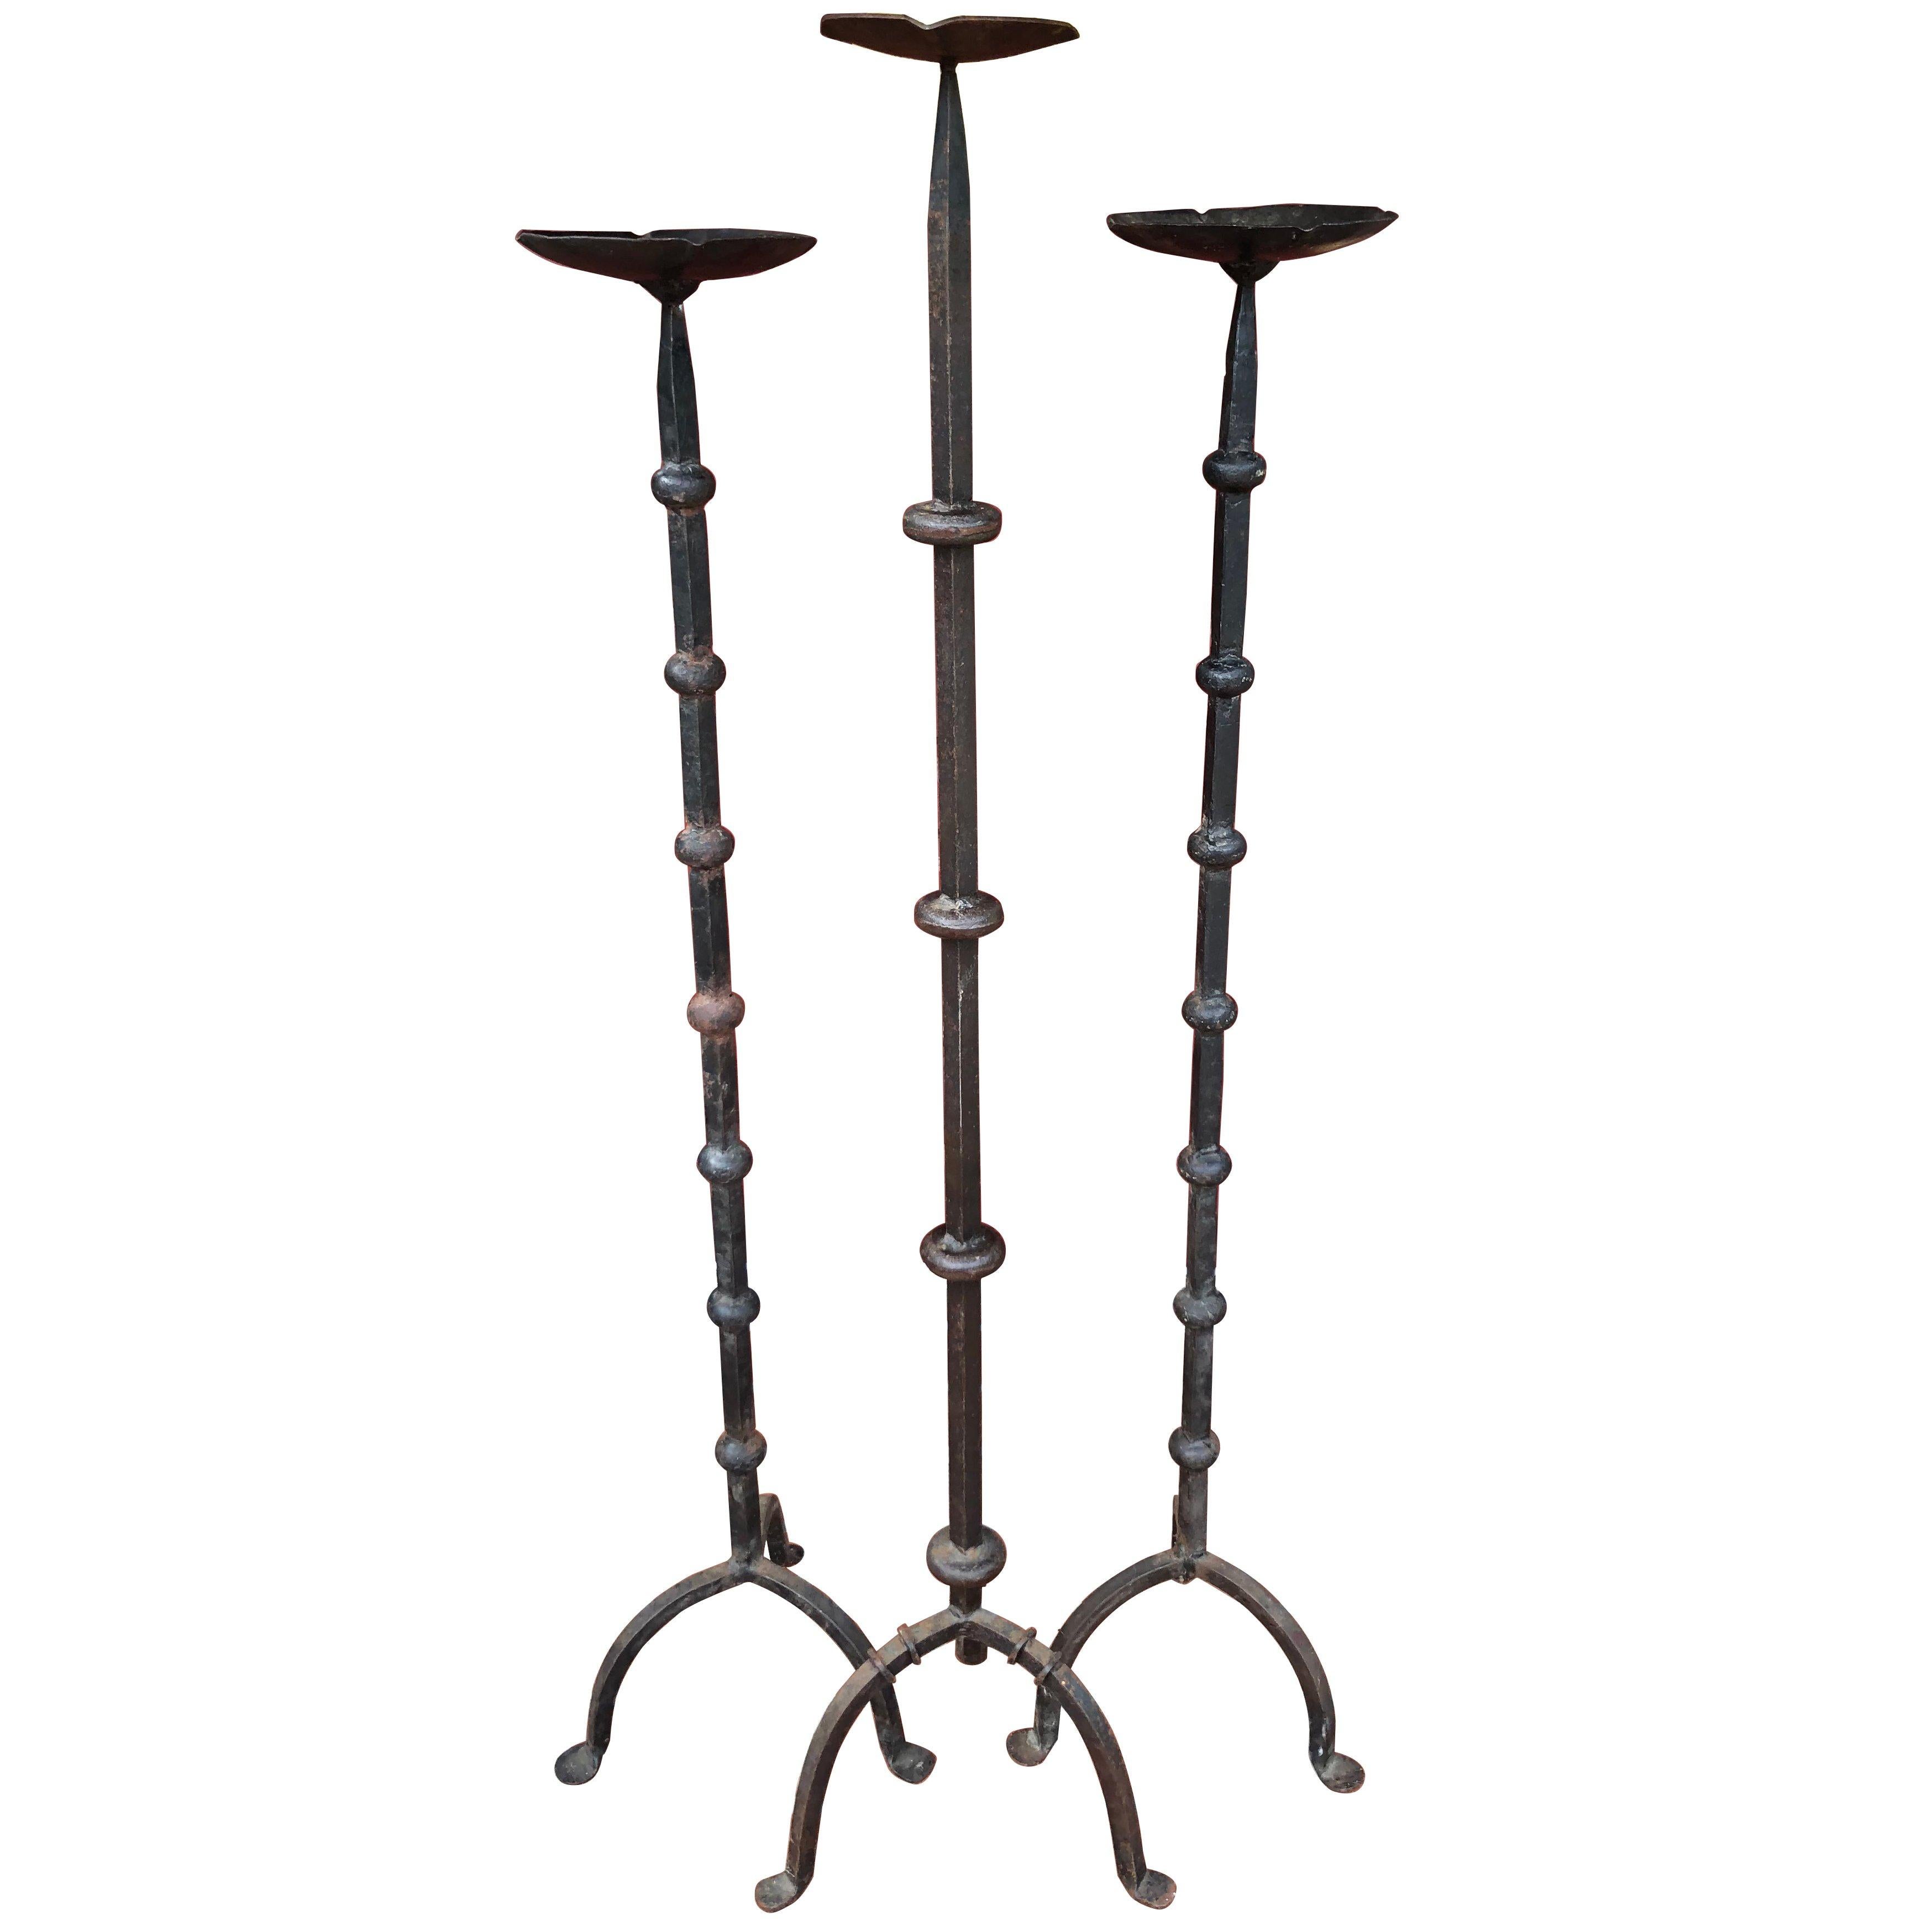 Set of Three Hand-Wrought Iron Altar Floor Candle Stands